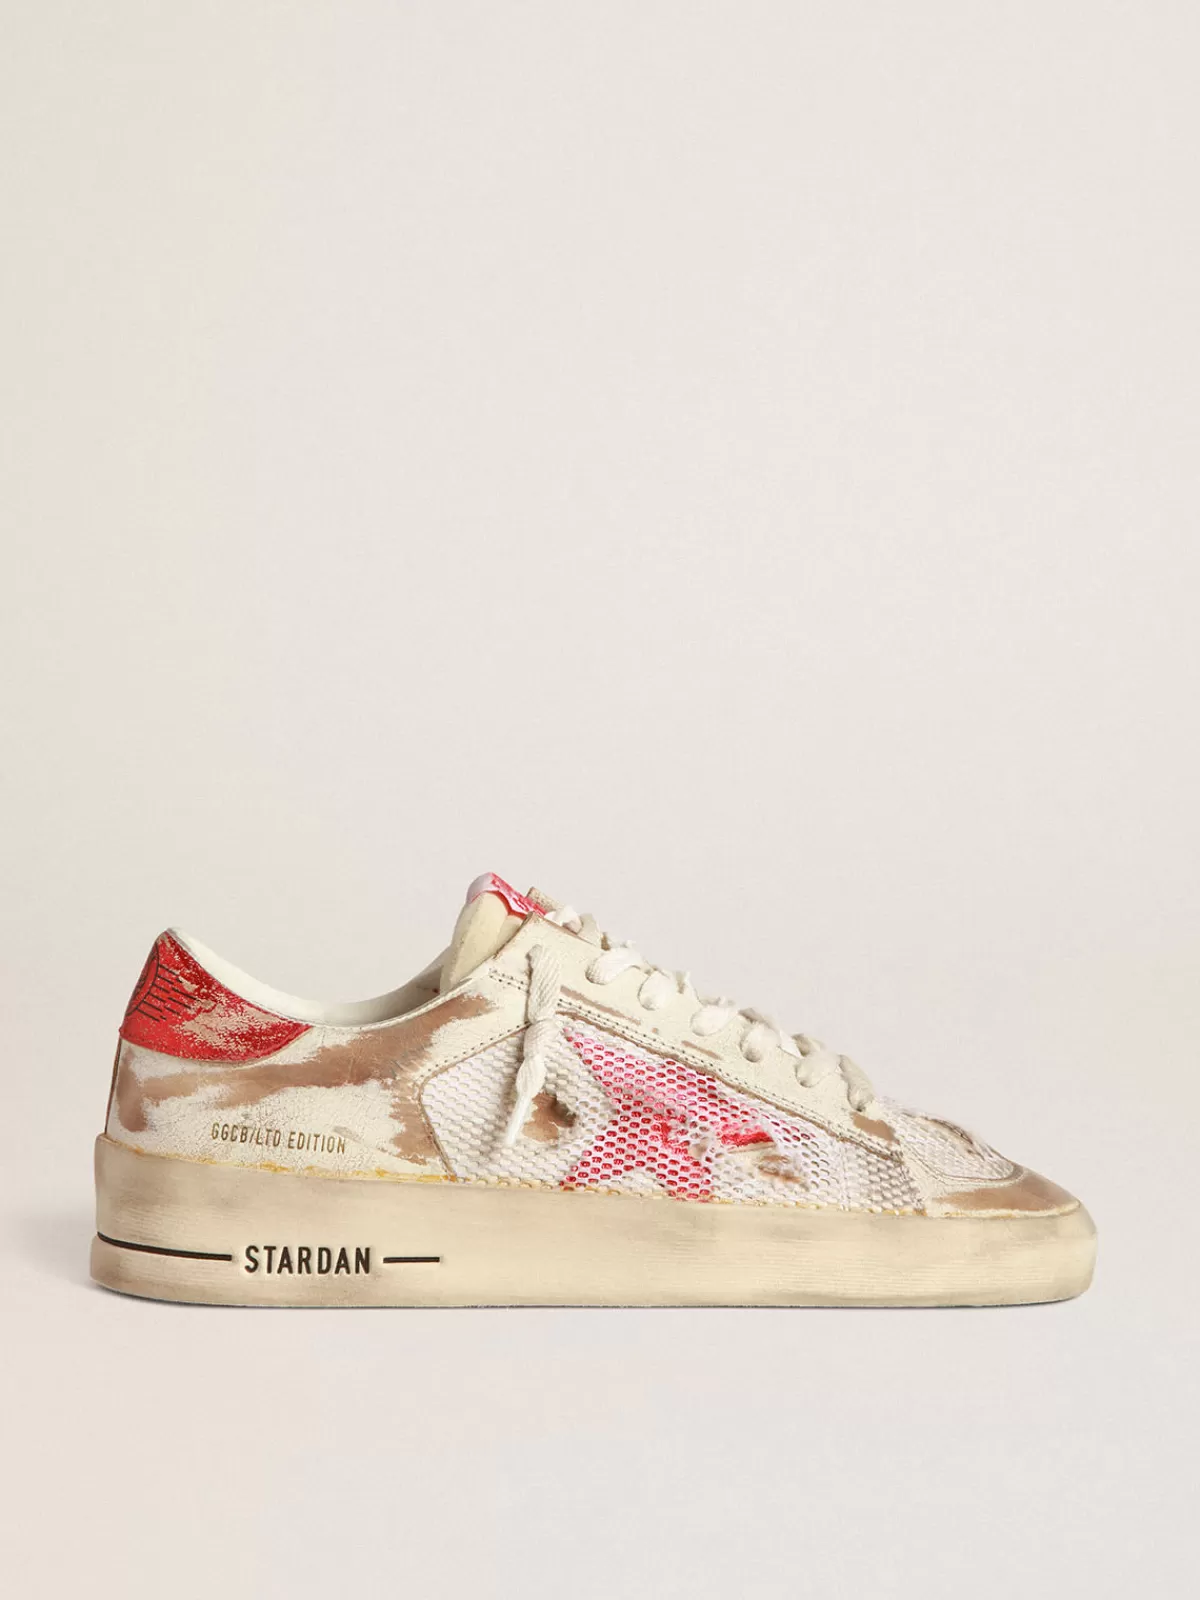 Golden Goose Stardan LAB sneakers in white leather and mesh with red laminated leather star Cheap